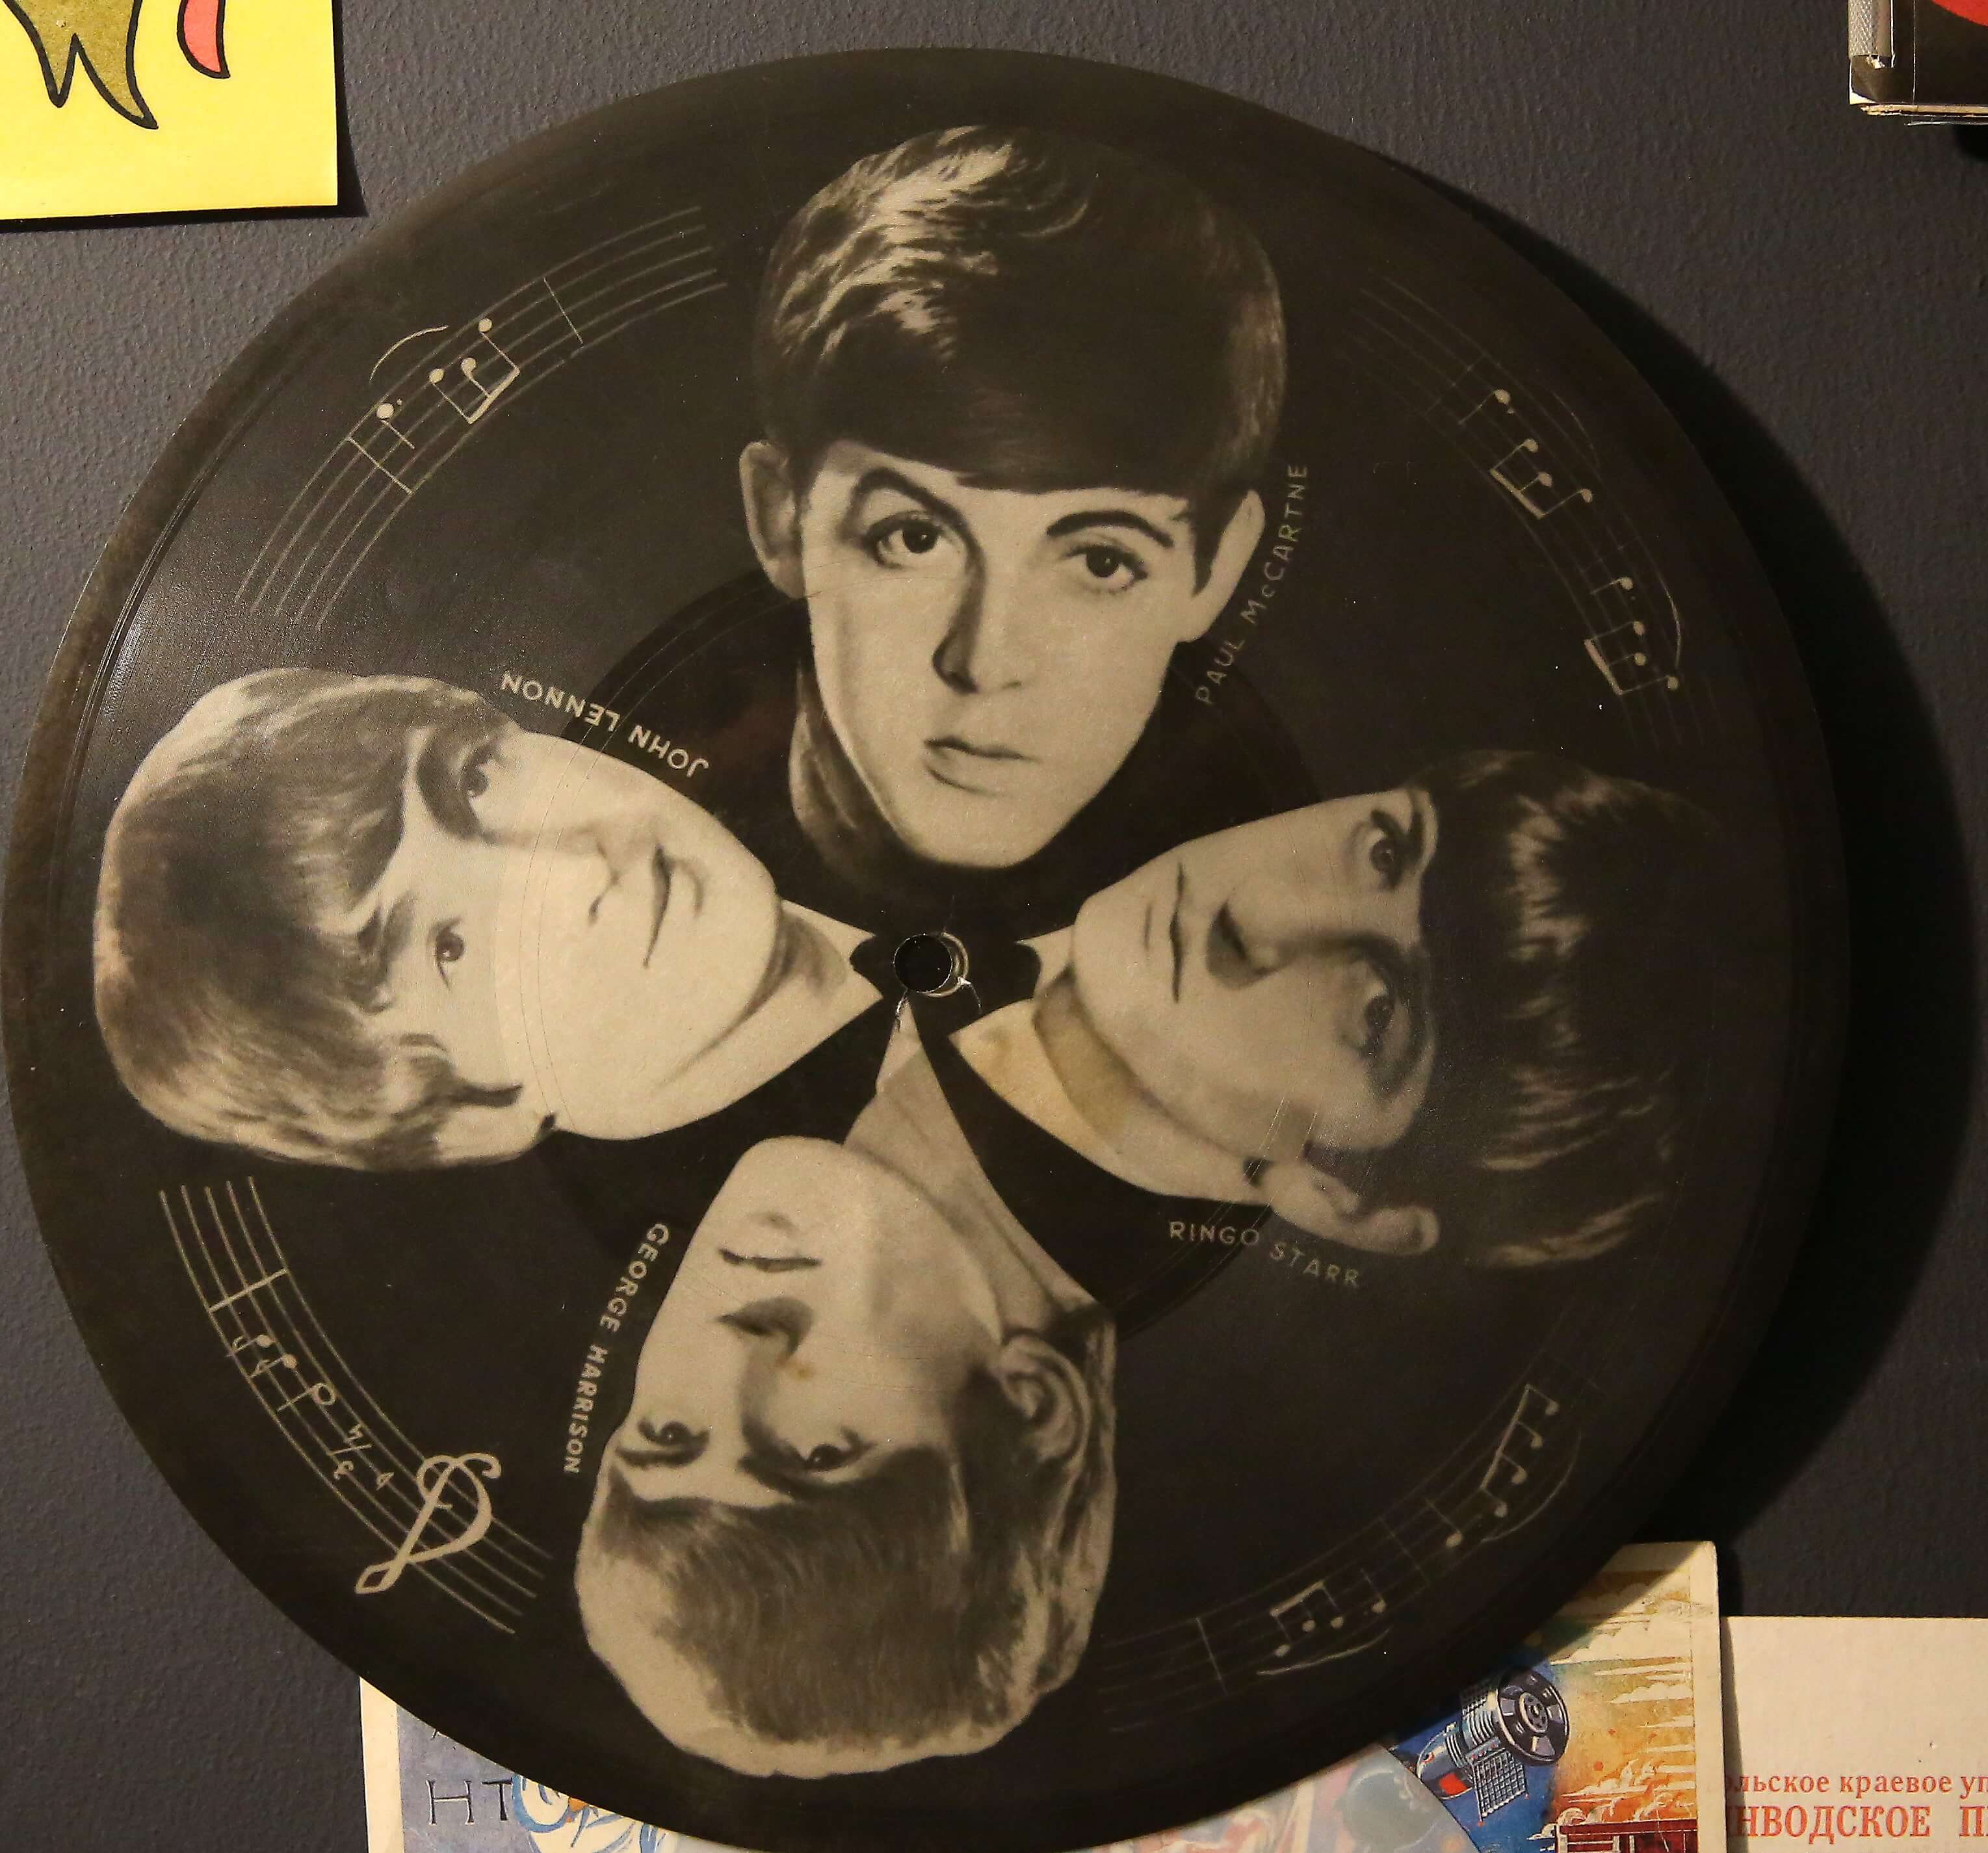 A vinyl with black-and-white images of The Beatles from the "Hey Jude" era